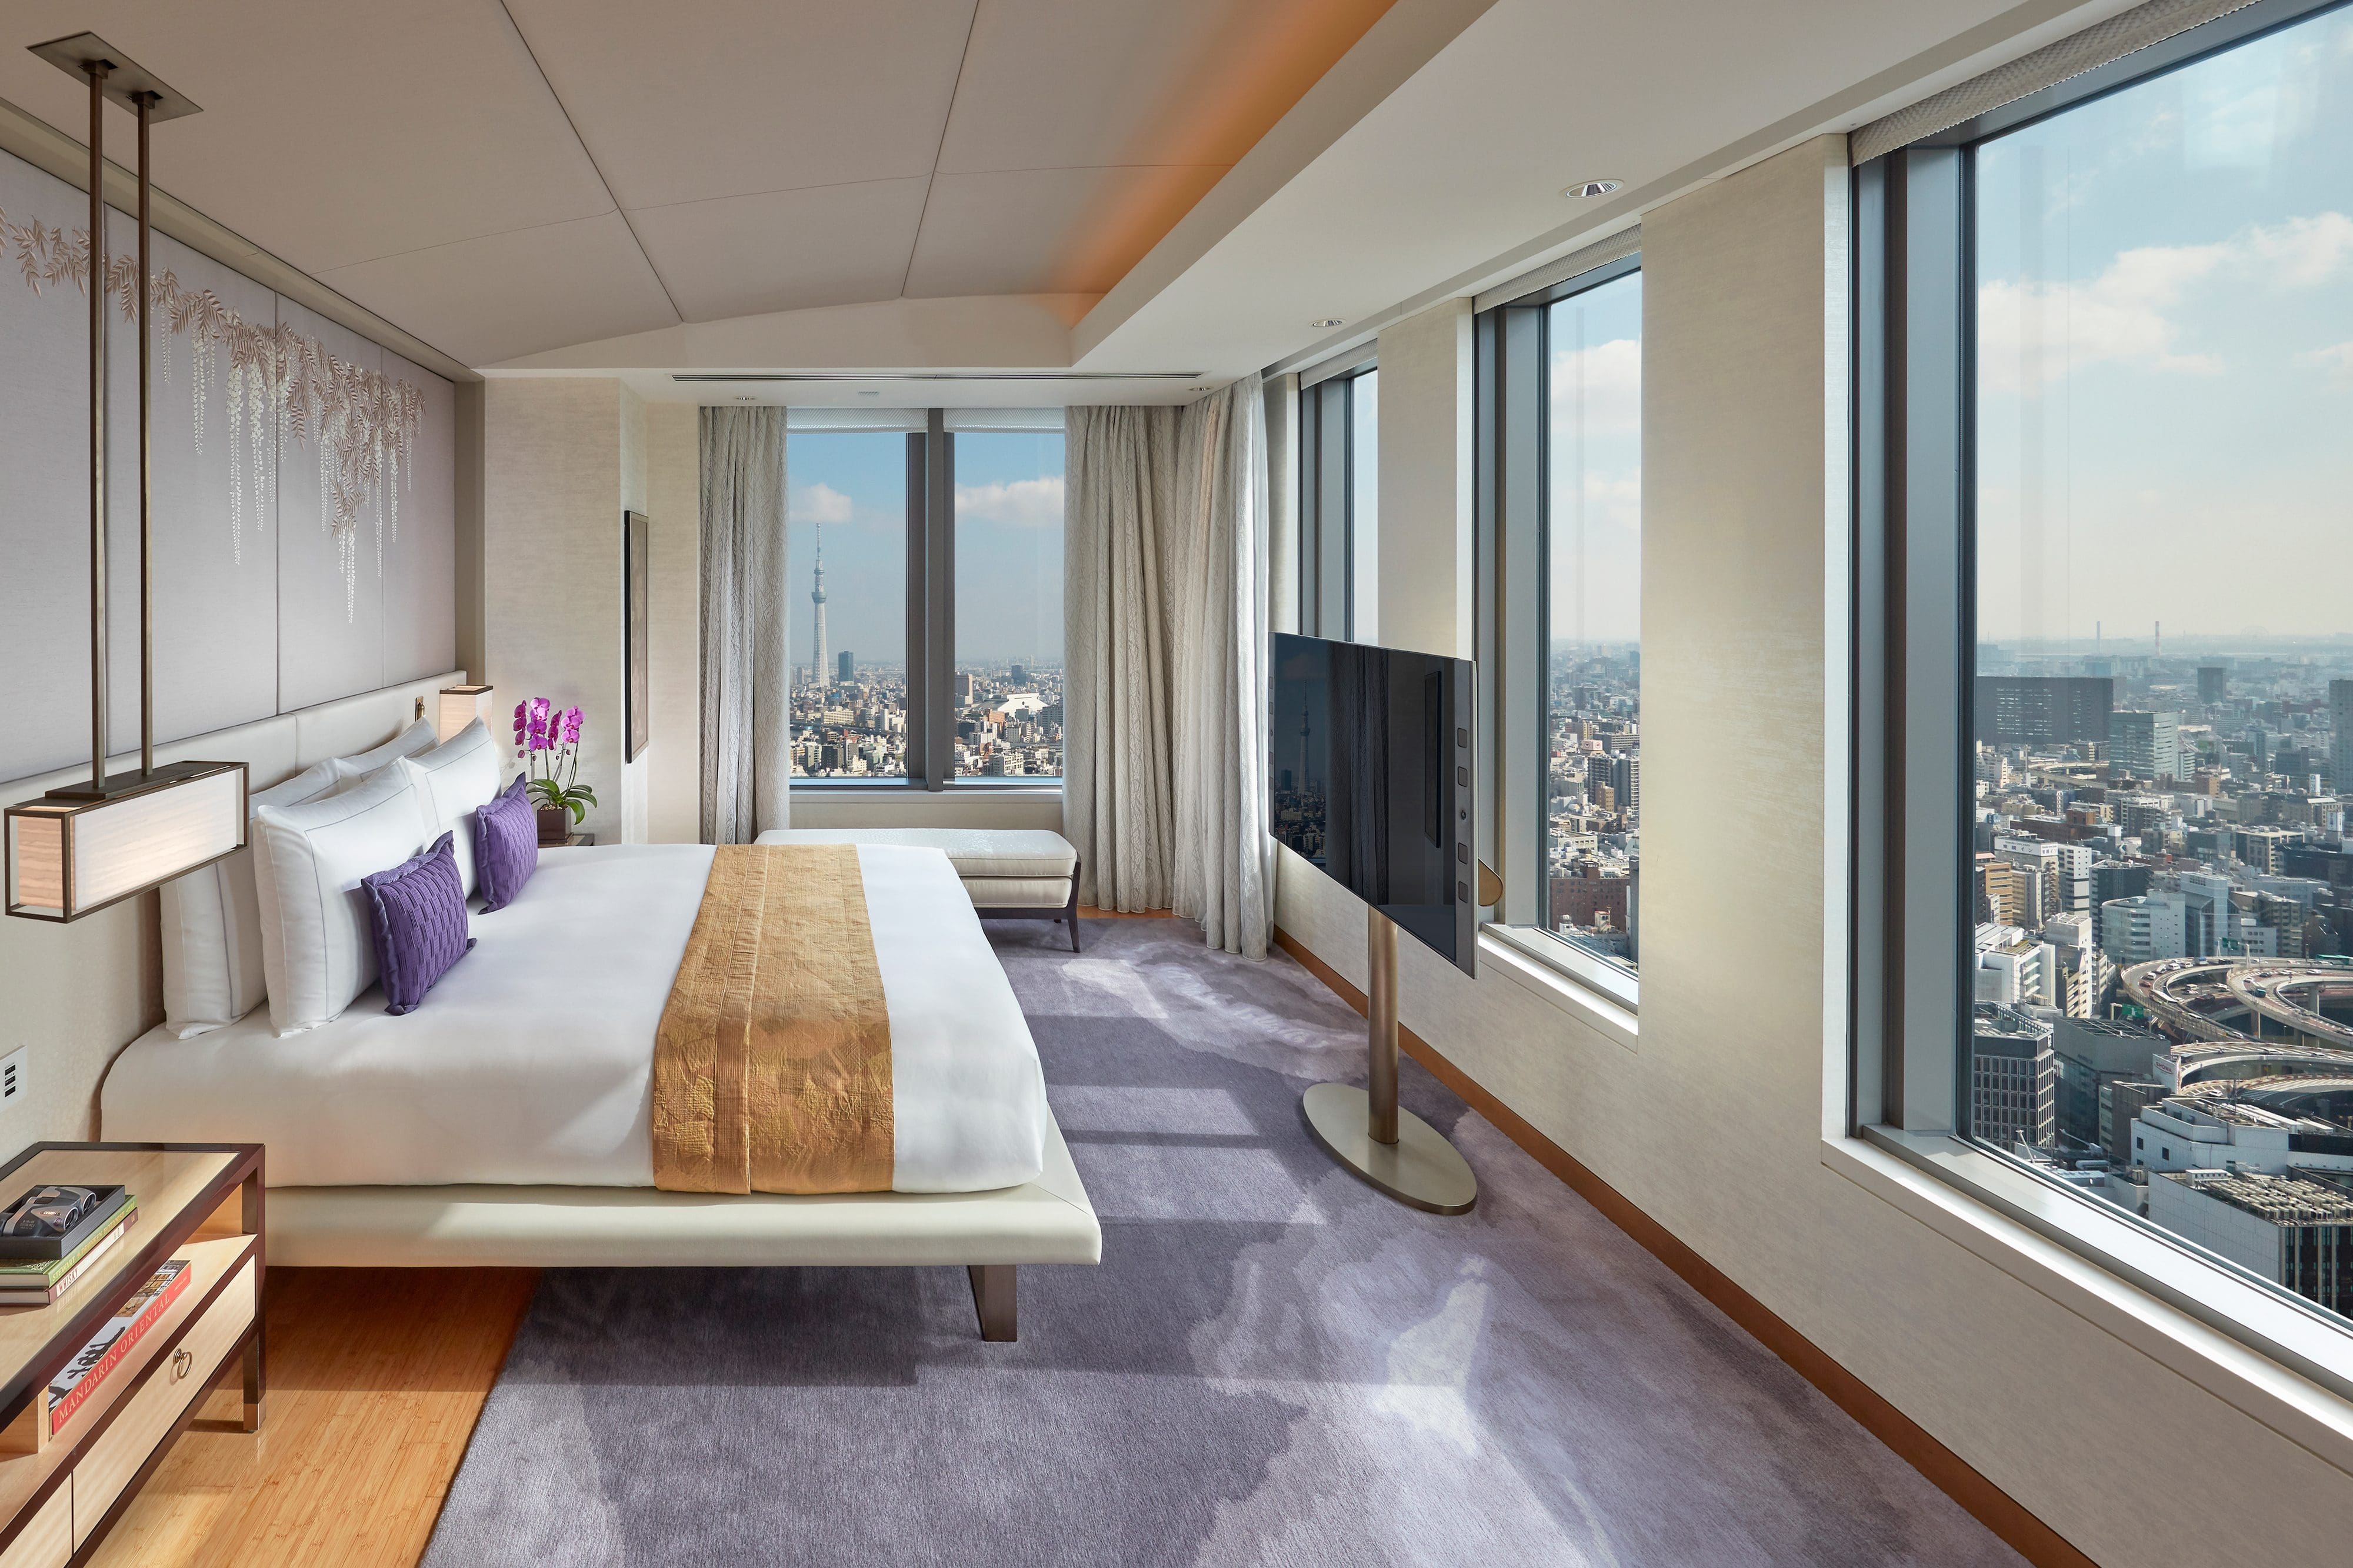 Interior of the Mandarin Suite at Mandarin Oriental, Tokyo with view of city